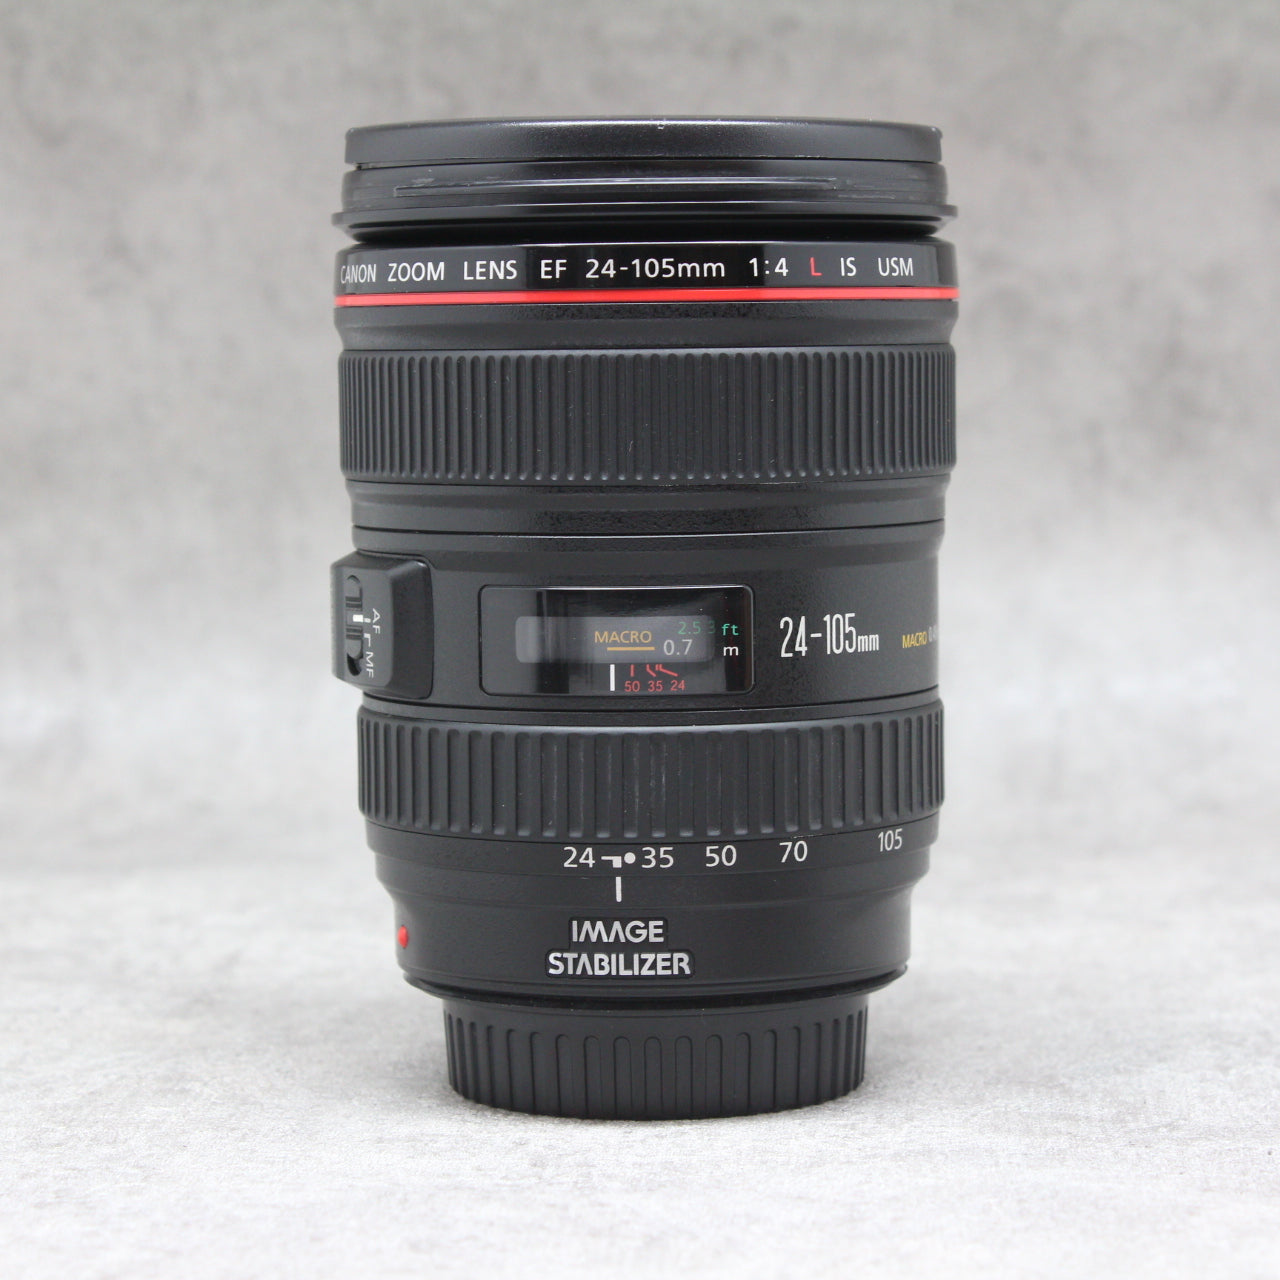 CanonEF24-105mm f4 IS USM